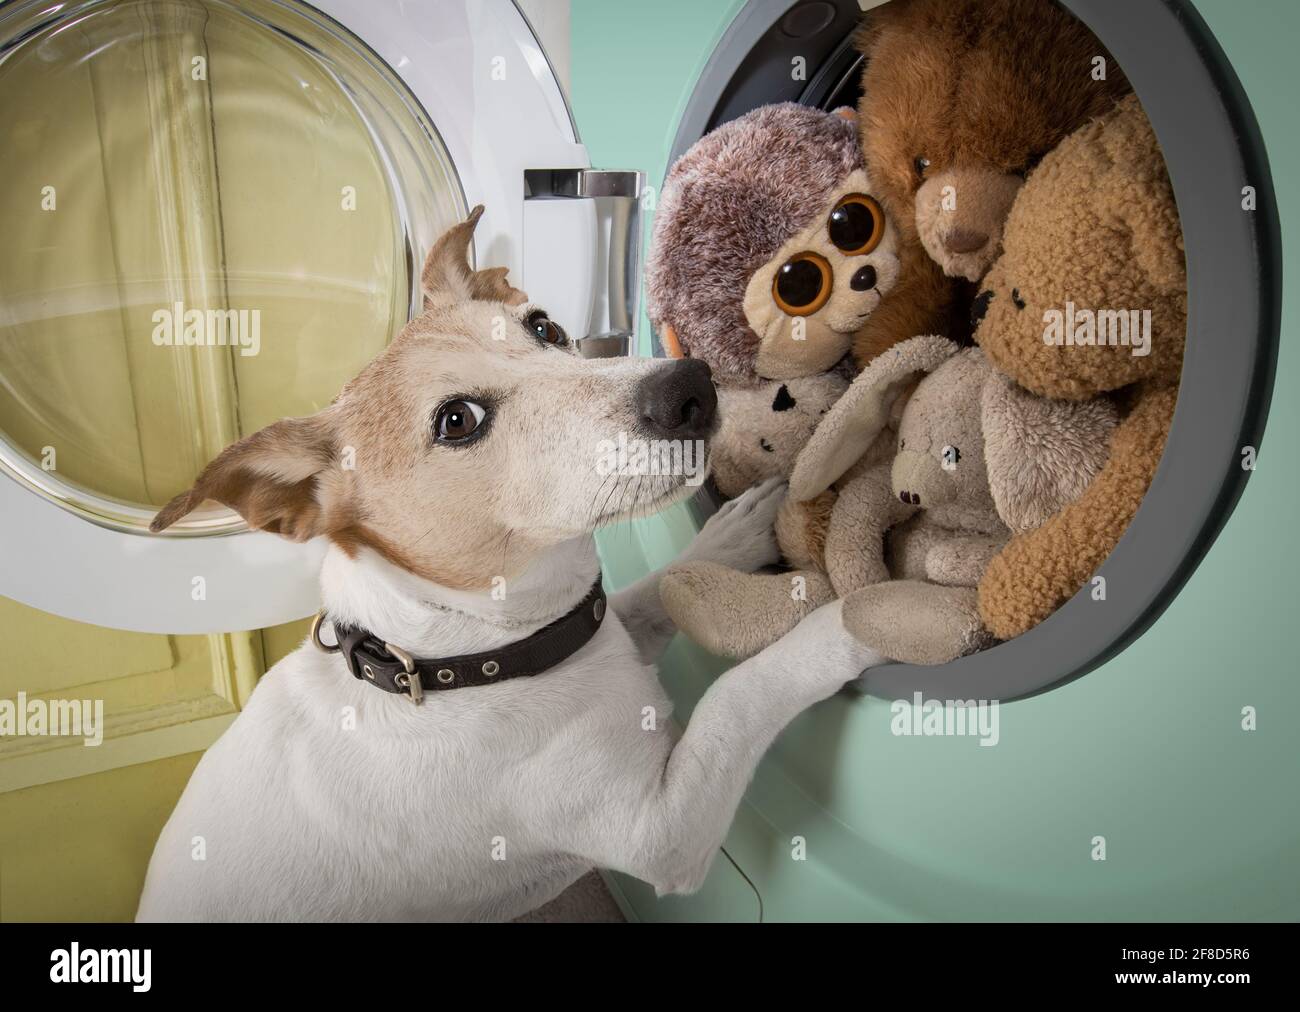 dog at a washing machine ready to do the chores and homework or housework and clean the  dirty teddy bears Stock Photo